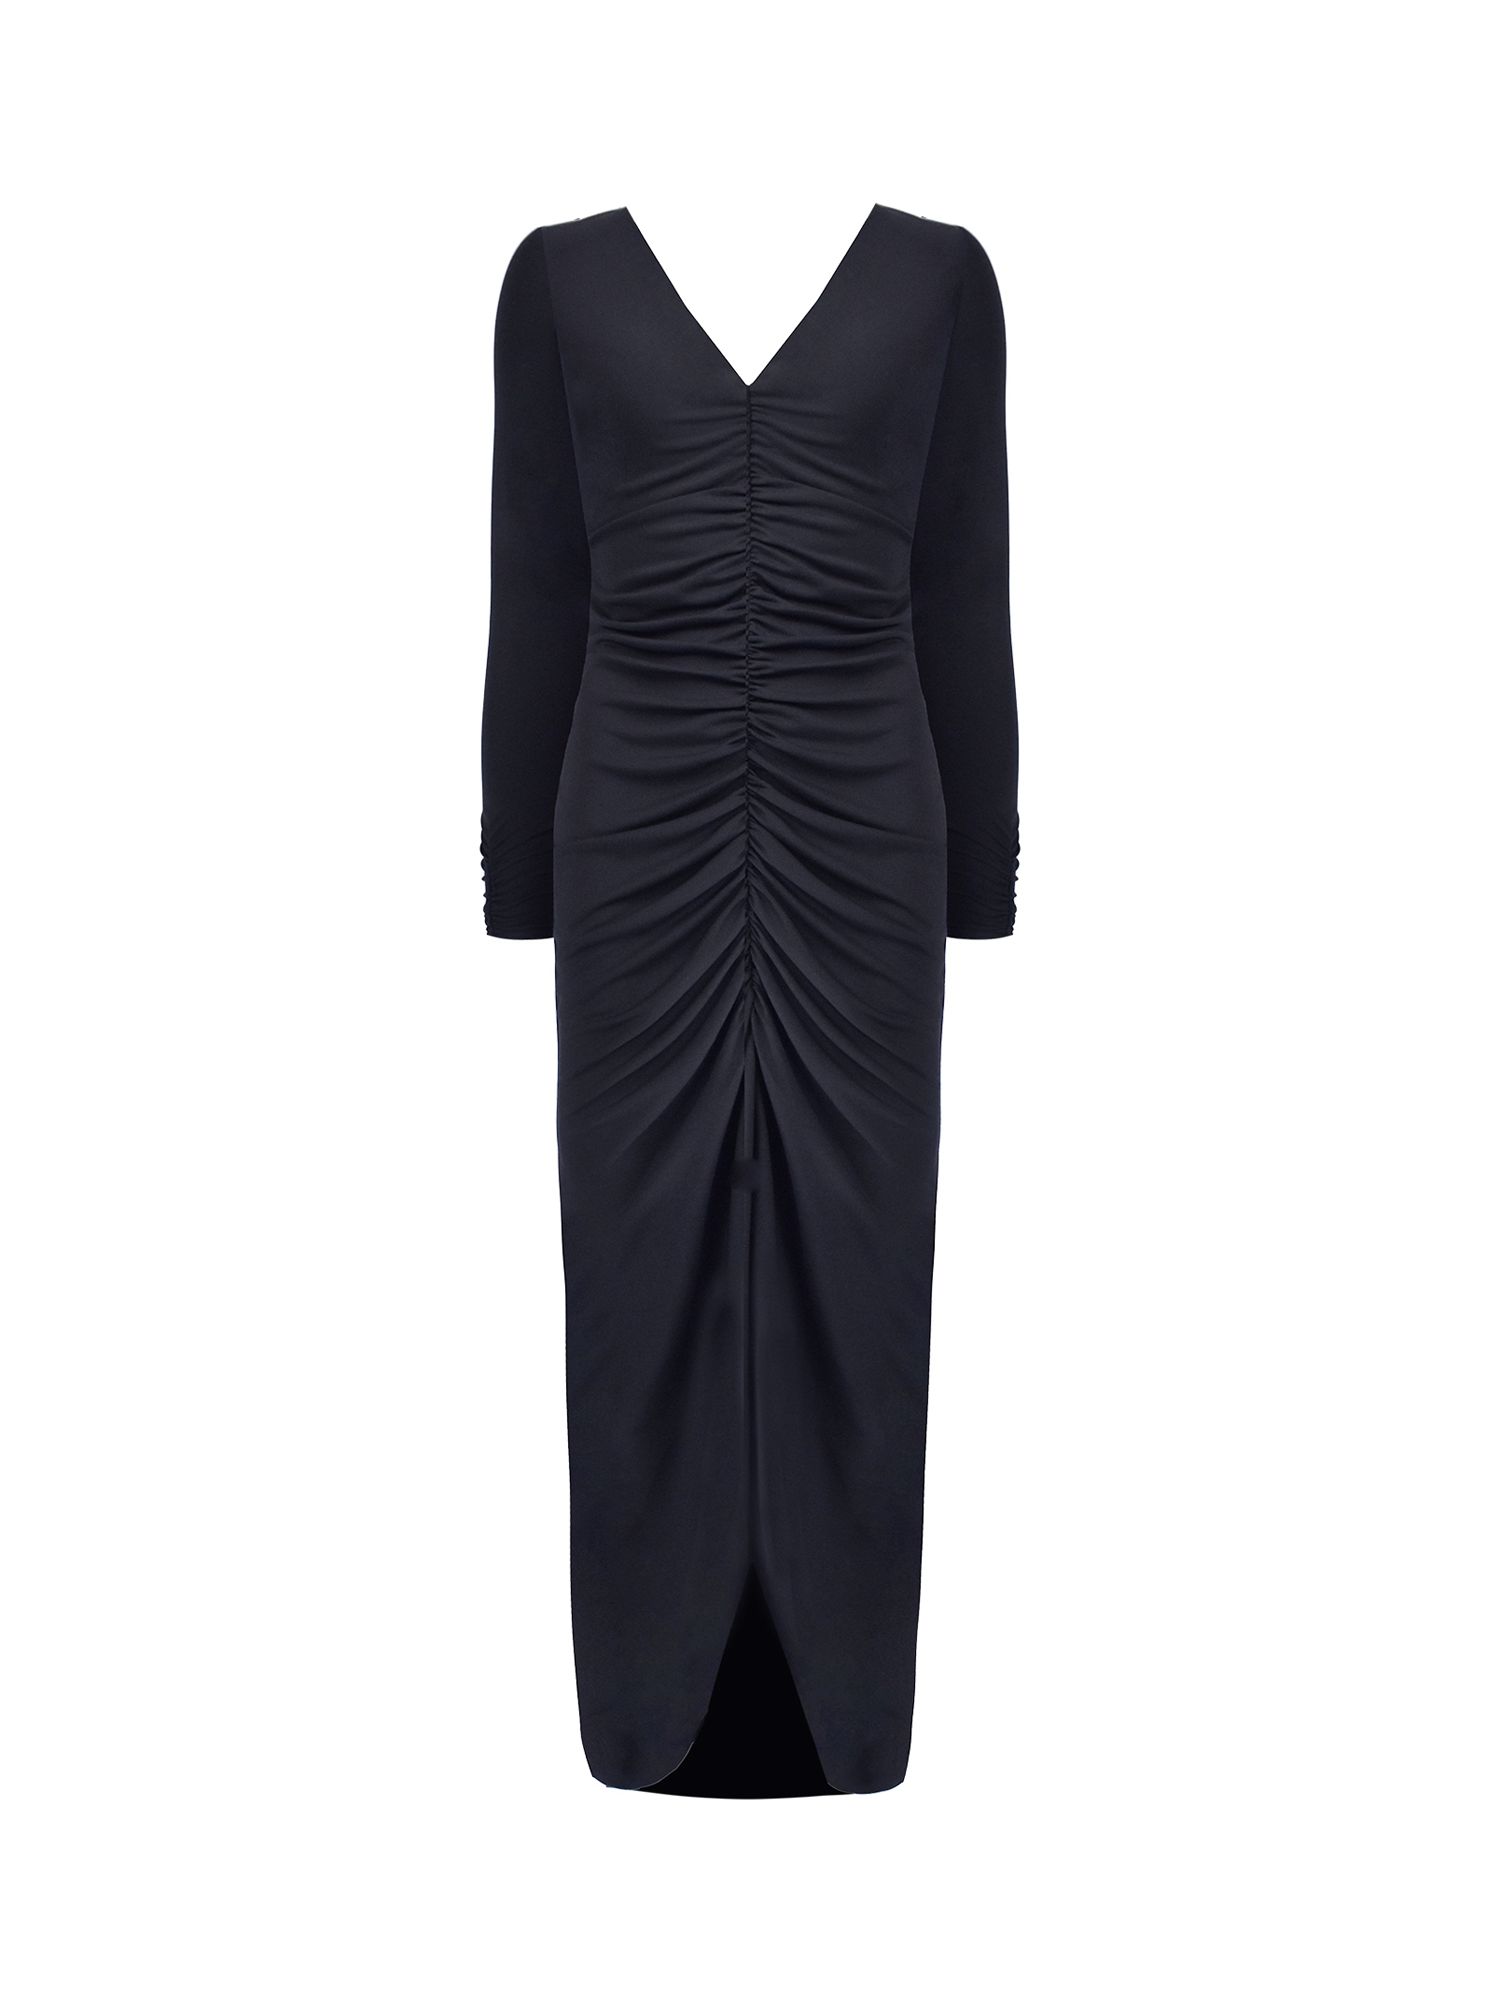 Buy Ro&Zo Petite Jersey Ruch Front Dress, Black Online at johnlewis.com